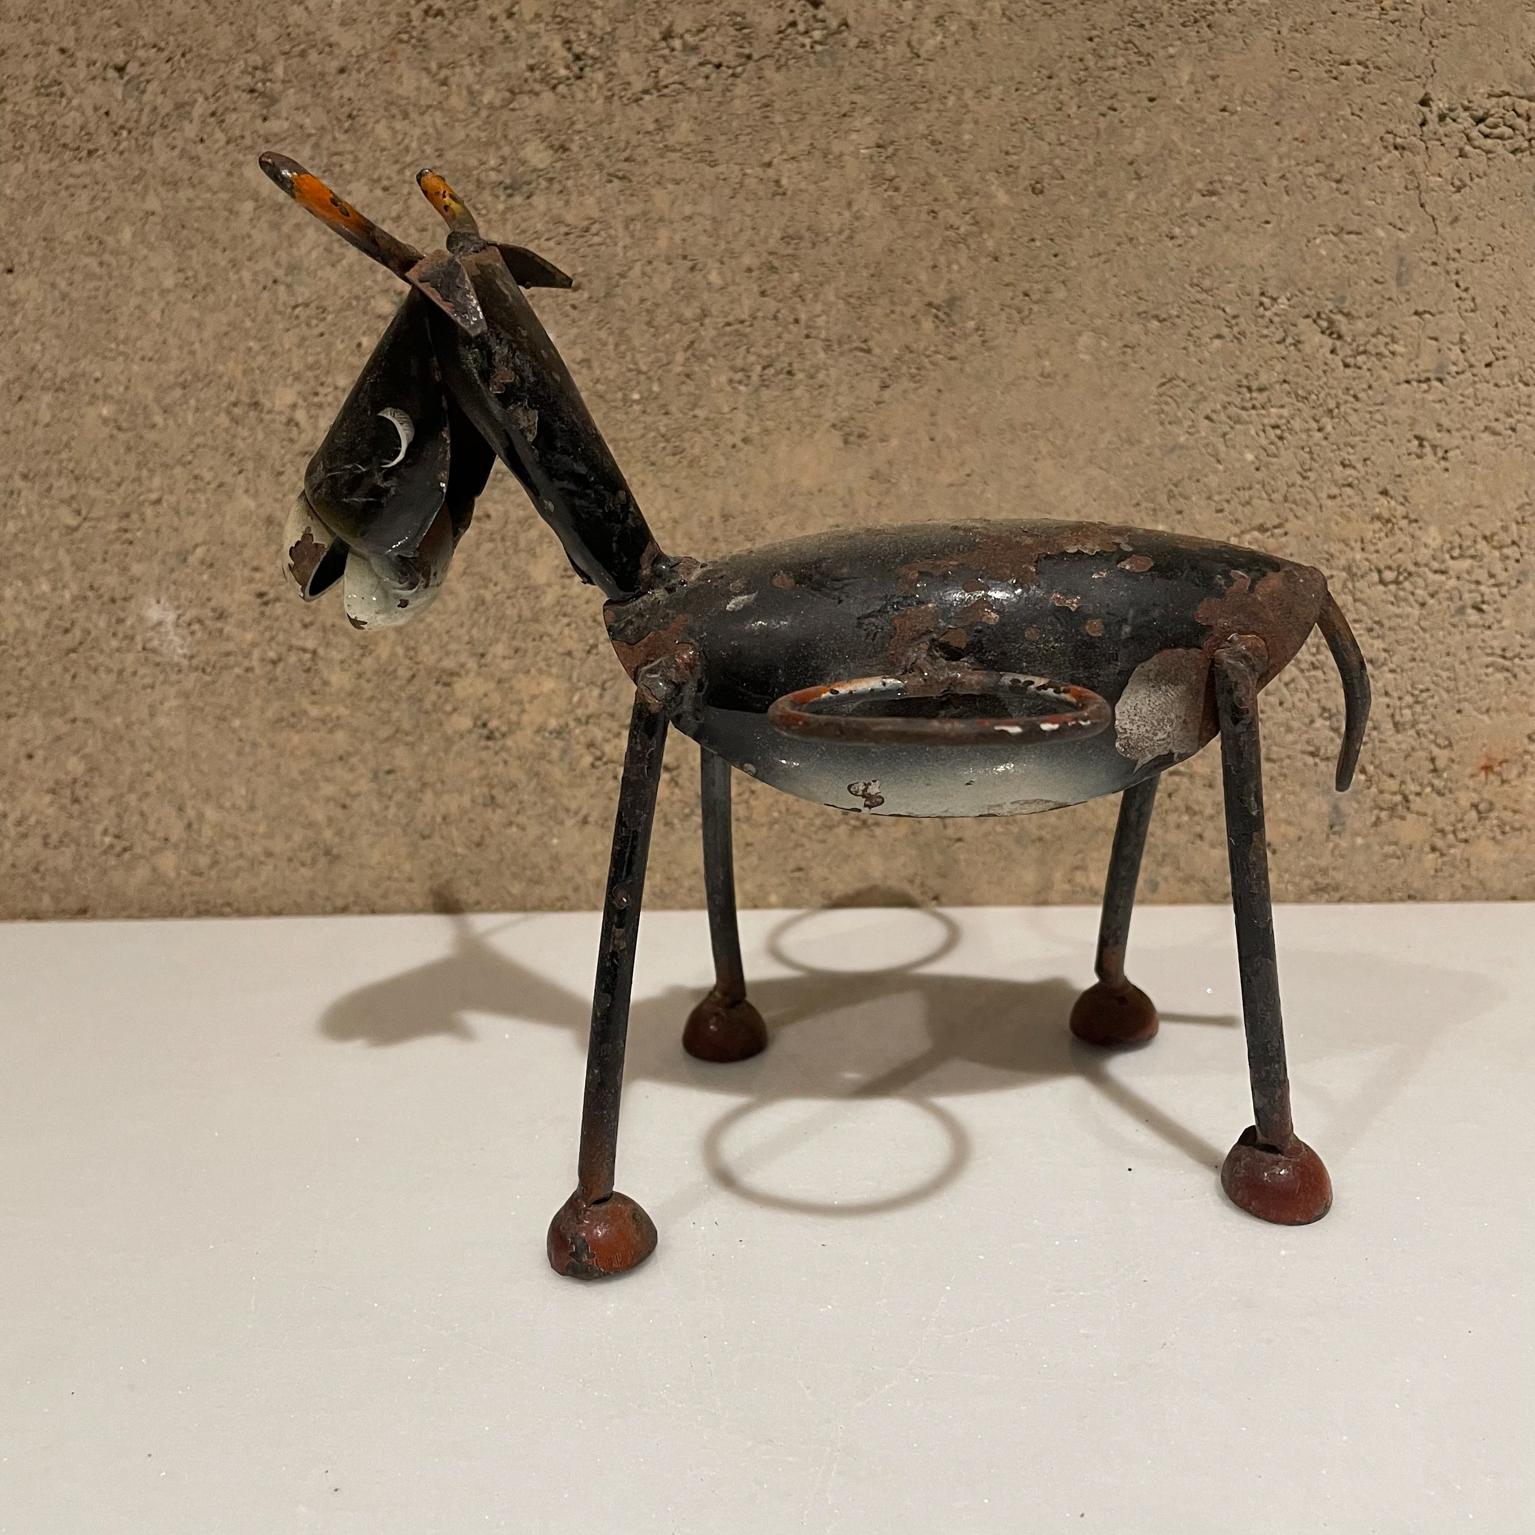 1970s Style Manuel Felguerez Modernist Black Donkey Valet Caddy Viva Mexico In Good Condition For Sale In Chula Vista, CA